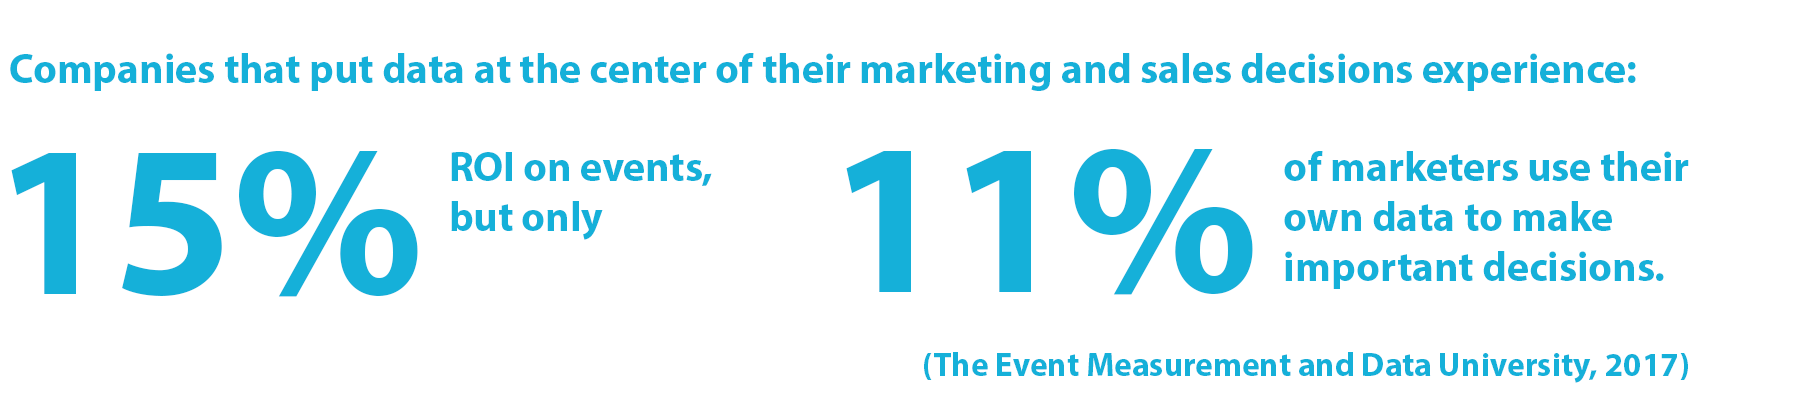 Statistic: Companies that put data at the center of their marketing and sales decisions experience 15-20% ROI on events, but only 11% of marketers use their own data to make important decisions. (The Event Measurement and Data University, Ben Grossman, Steve Boyce, Experiential Marketing Summit, 2017)